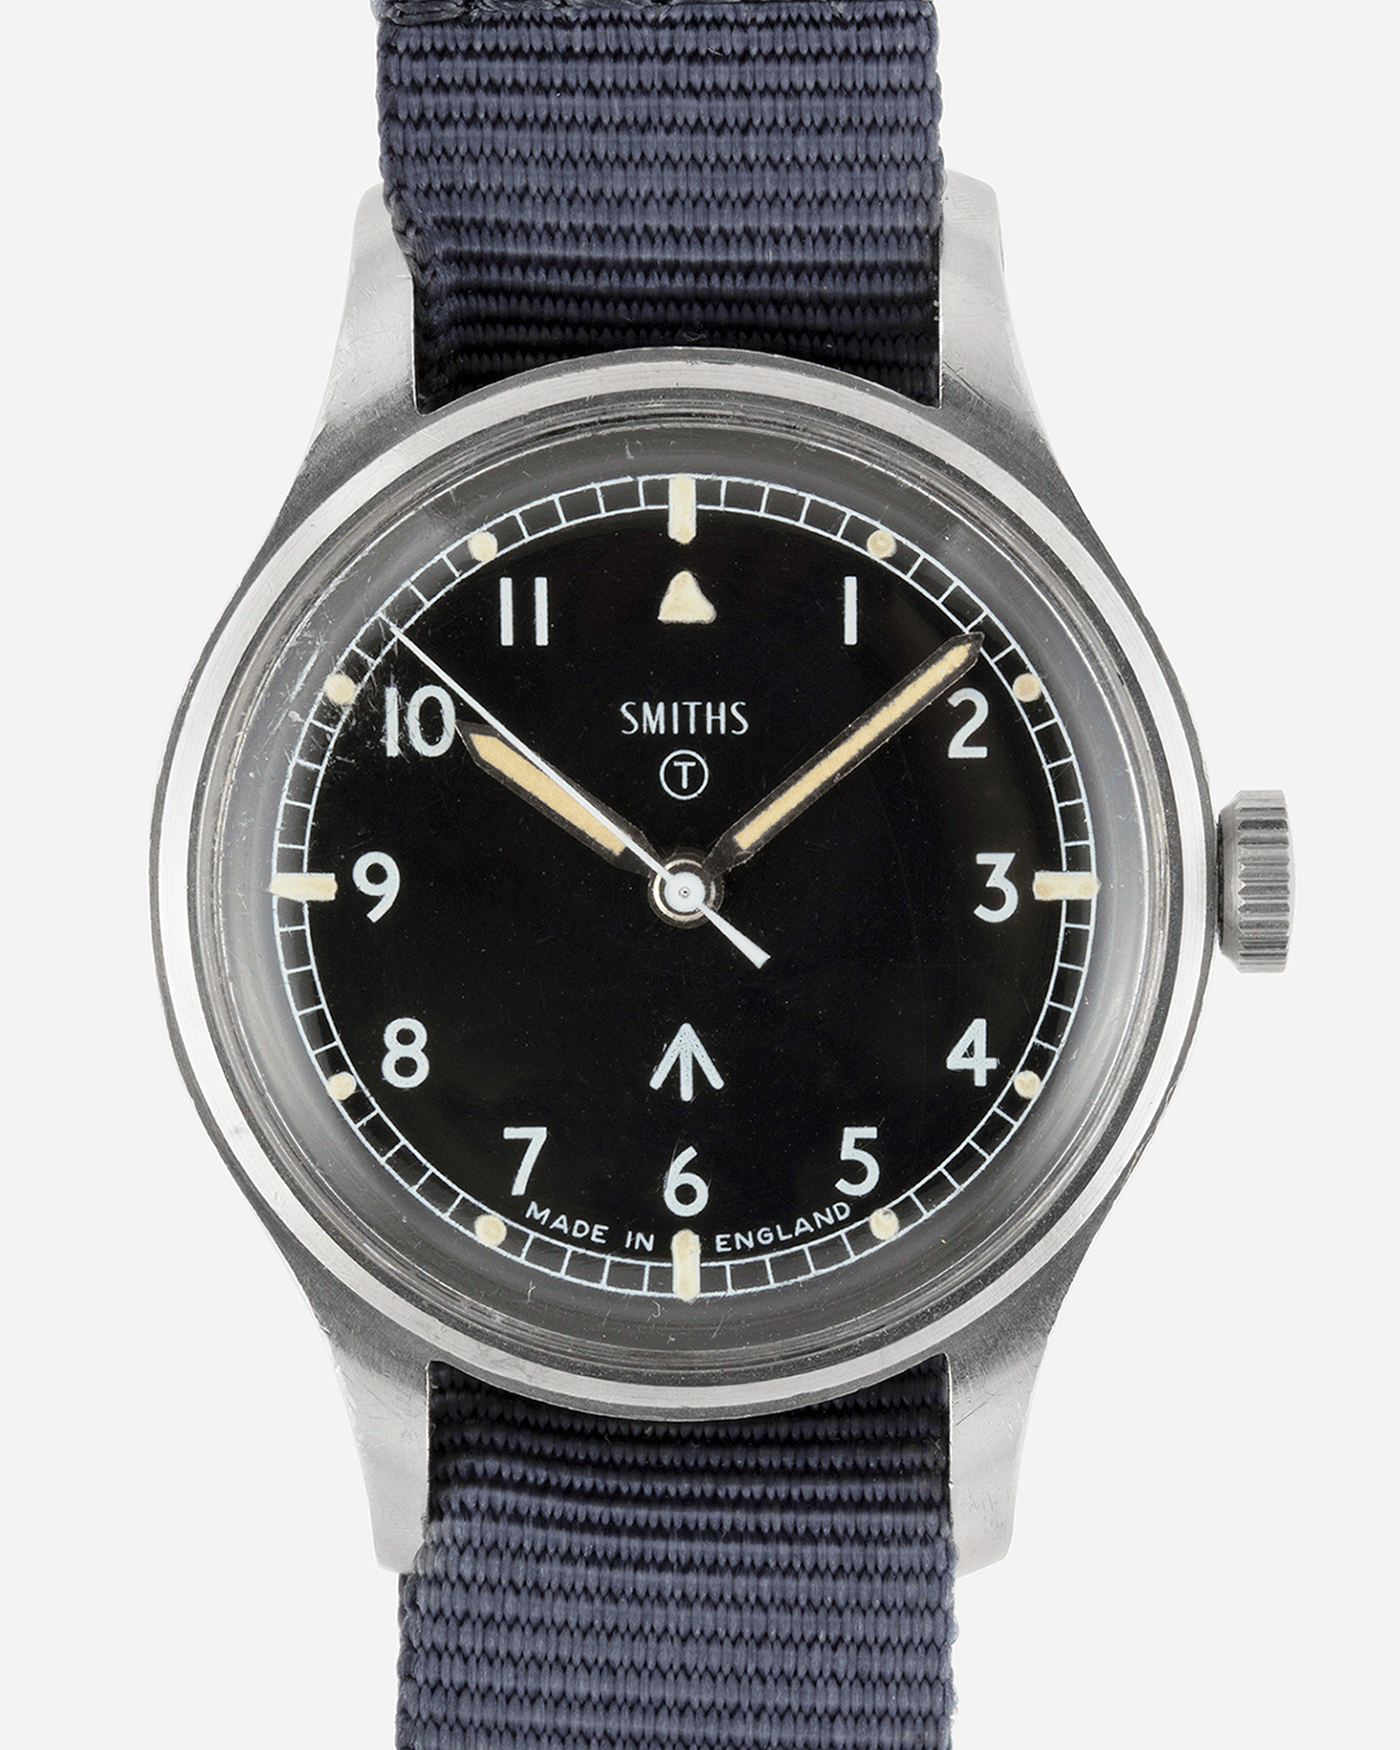 Smiths W10 Vintage British Military Watch | S.Song Vintage Watches For Sale